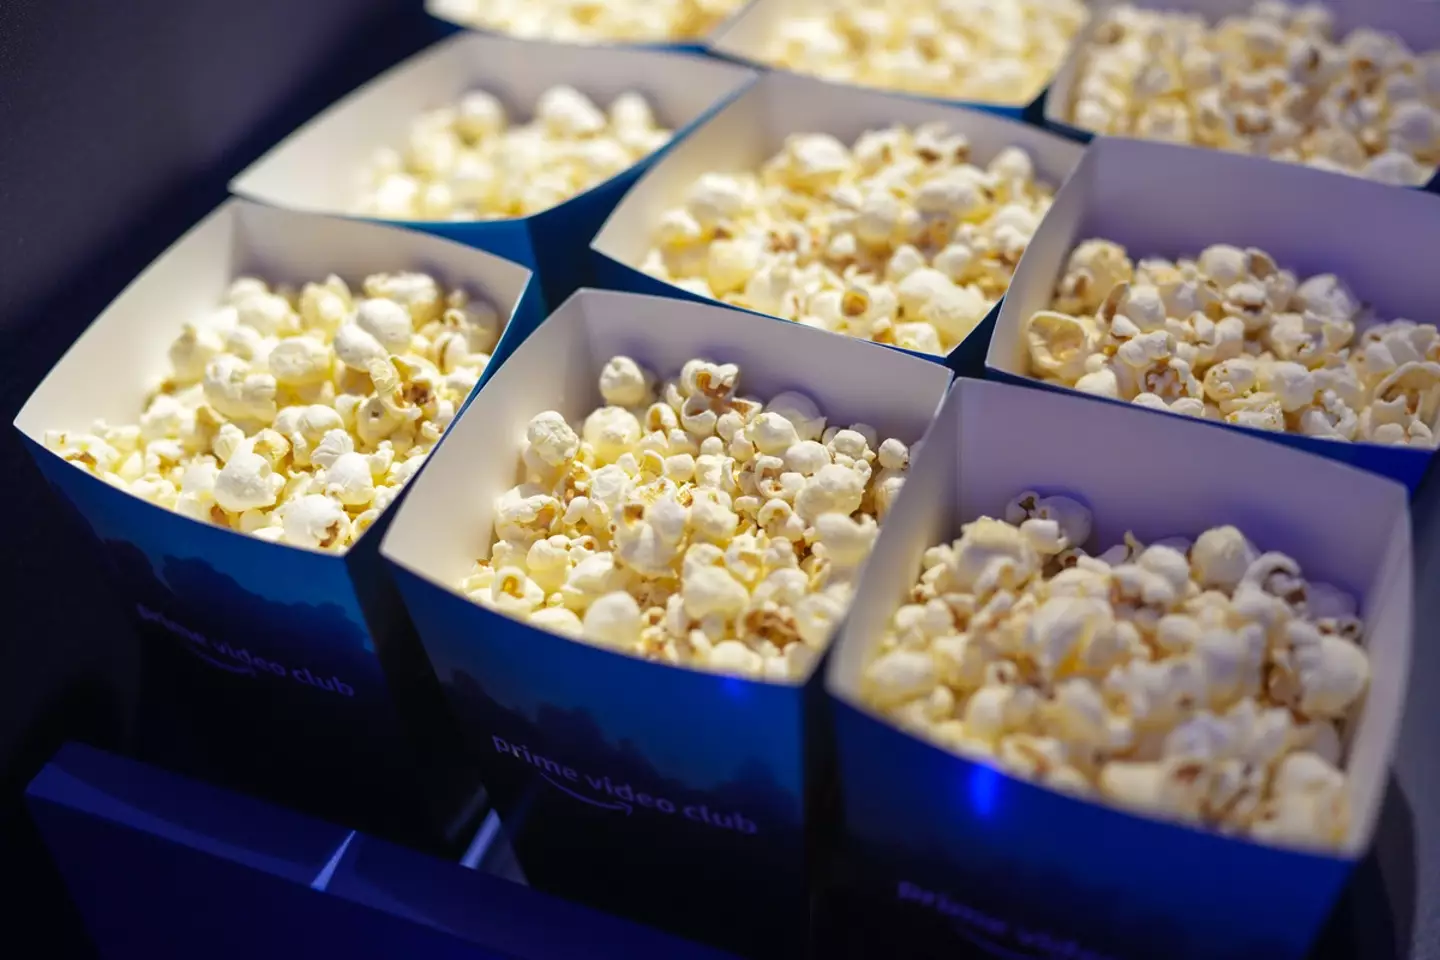 Film fans are urging cinema-goers to buy snacks at the cinema.